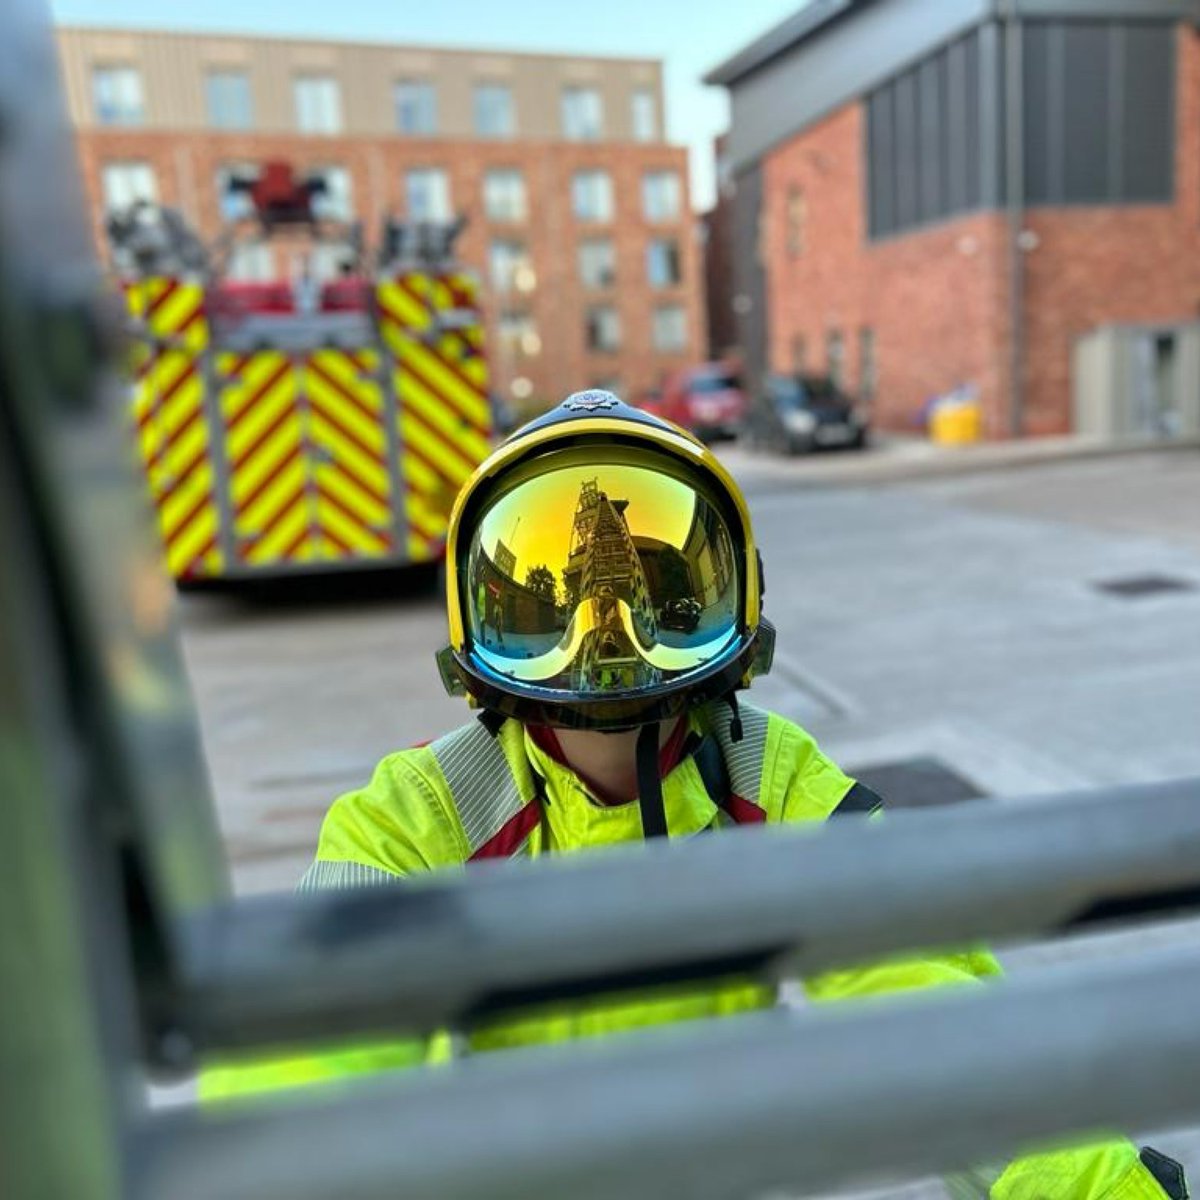 🚒 Ready to make a difference in your community? We're looking for paid on-call firefighters to join our team! Gain valuable skills and support your community when it counts the most.
 
Apply today and make a difference! orlo.uk/Tv6E7
 
#NeedMore #ThinkOnCall